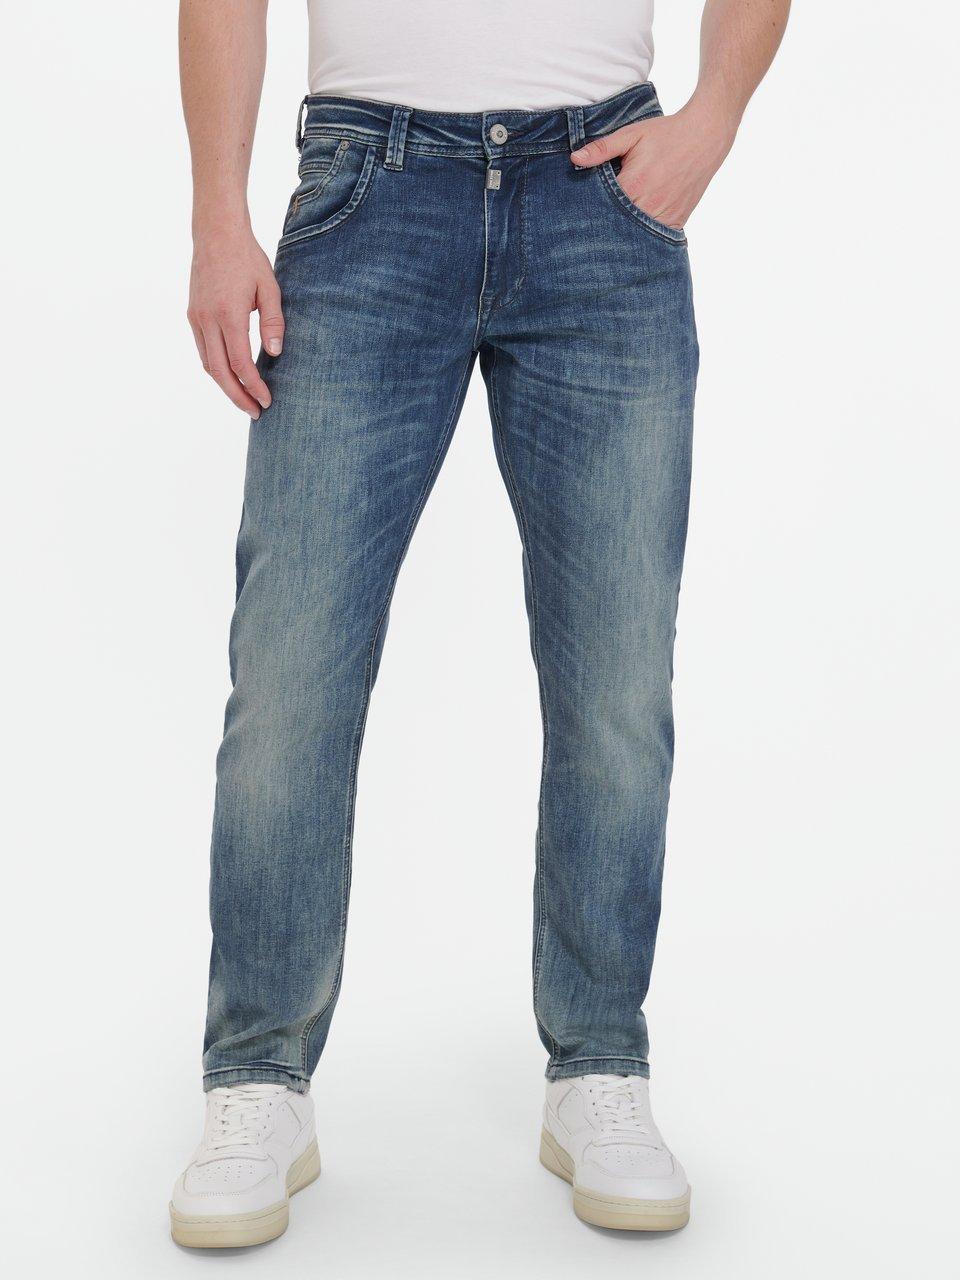 Timezone - Jeans inchlengte 32